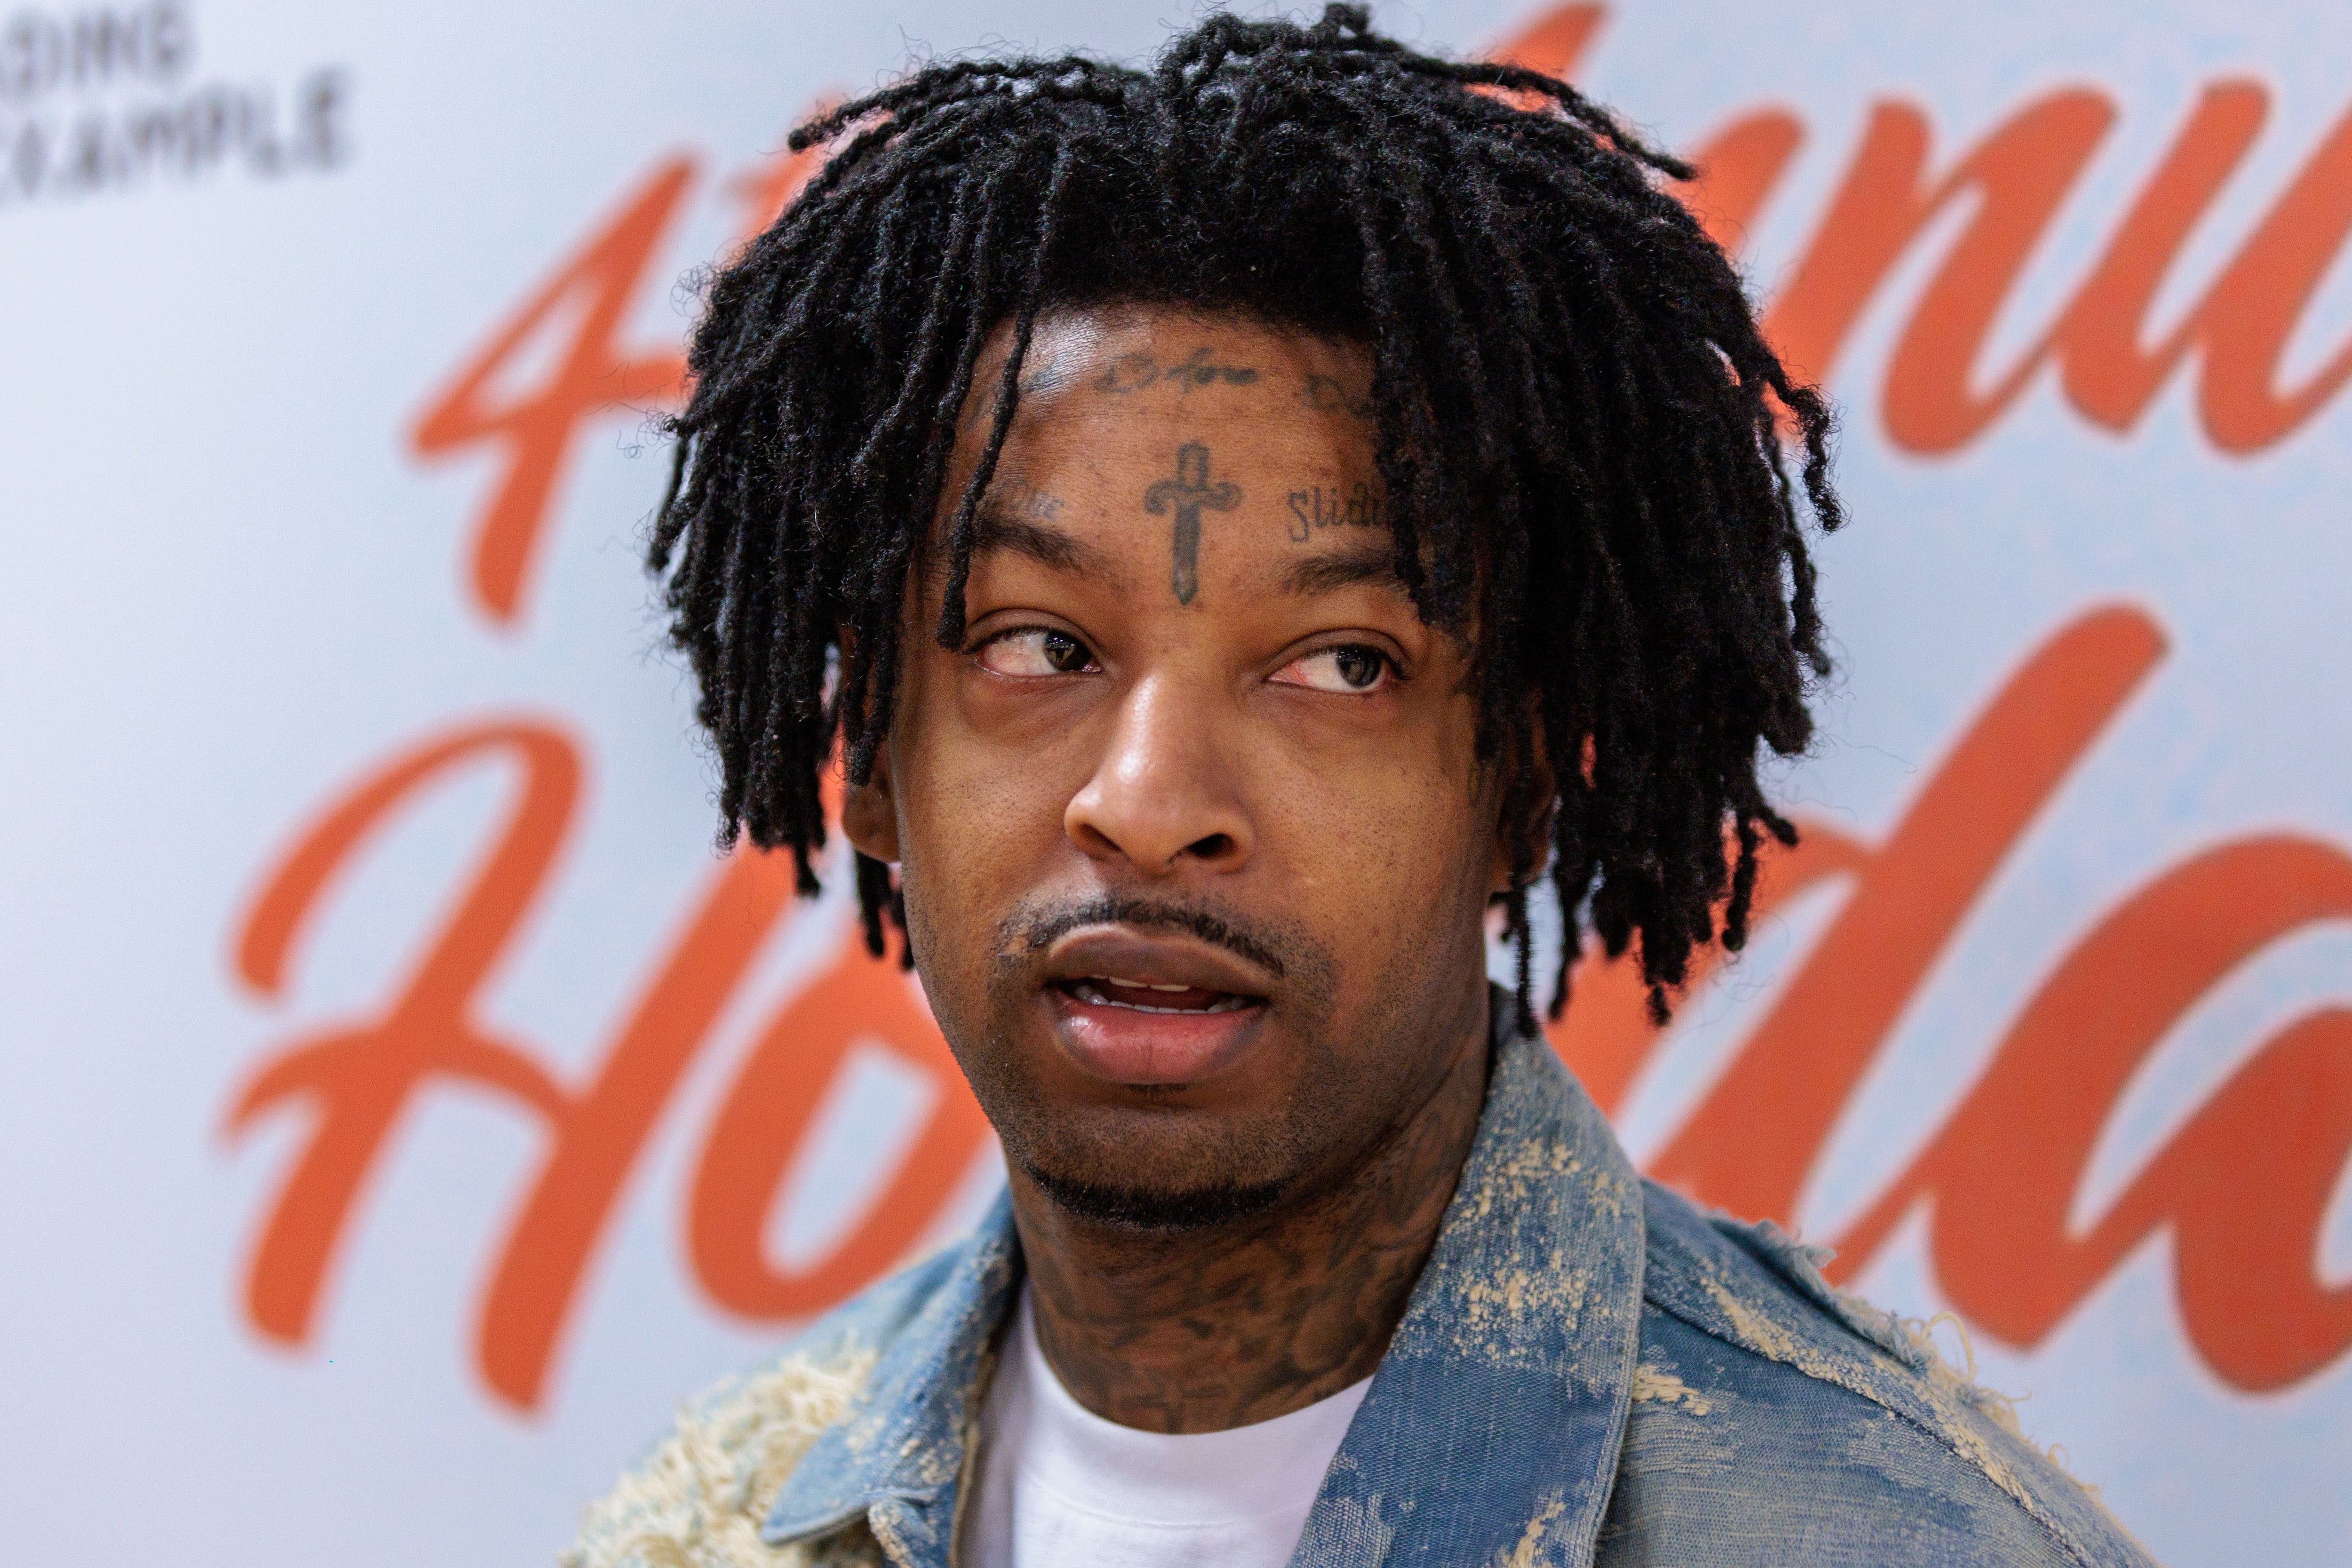 21 Savage's Bank Account Campaign Teaches Kids Financial Literacy